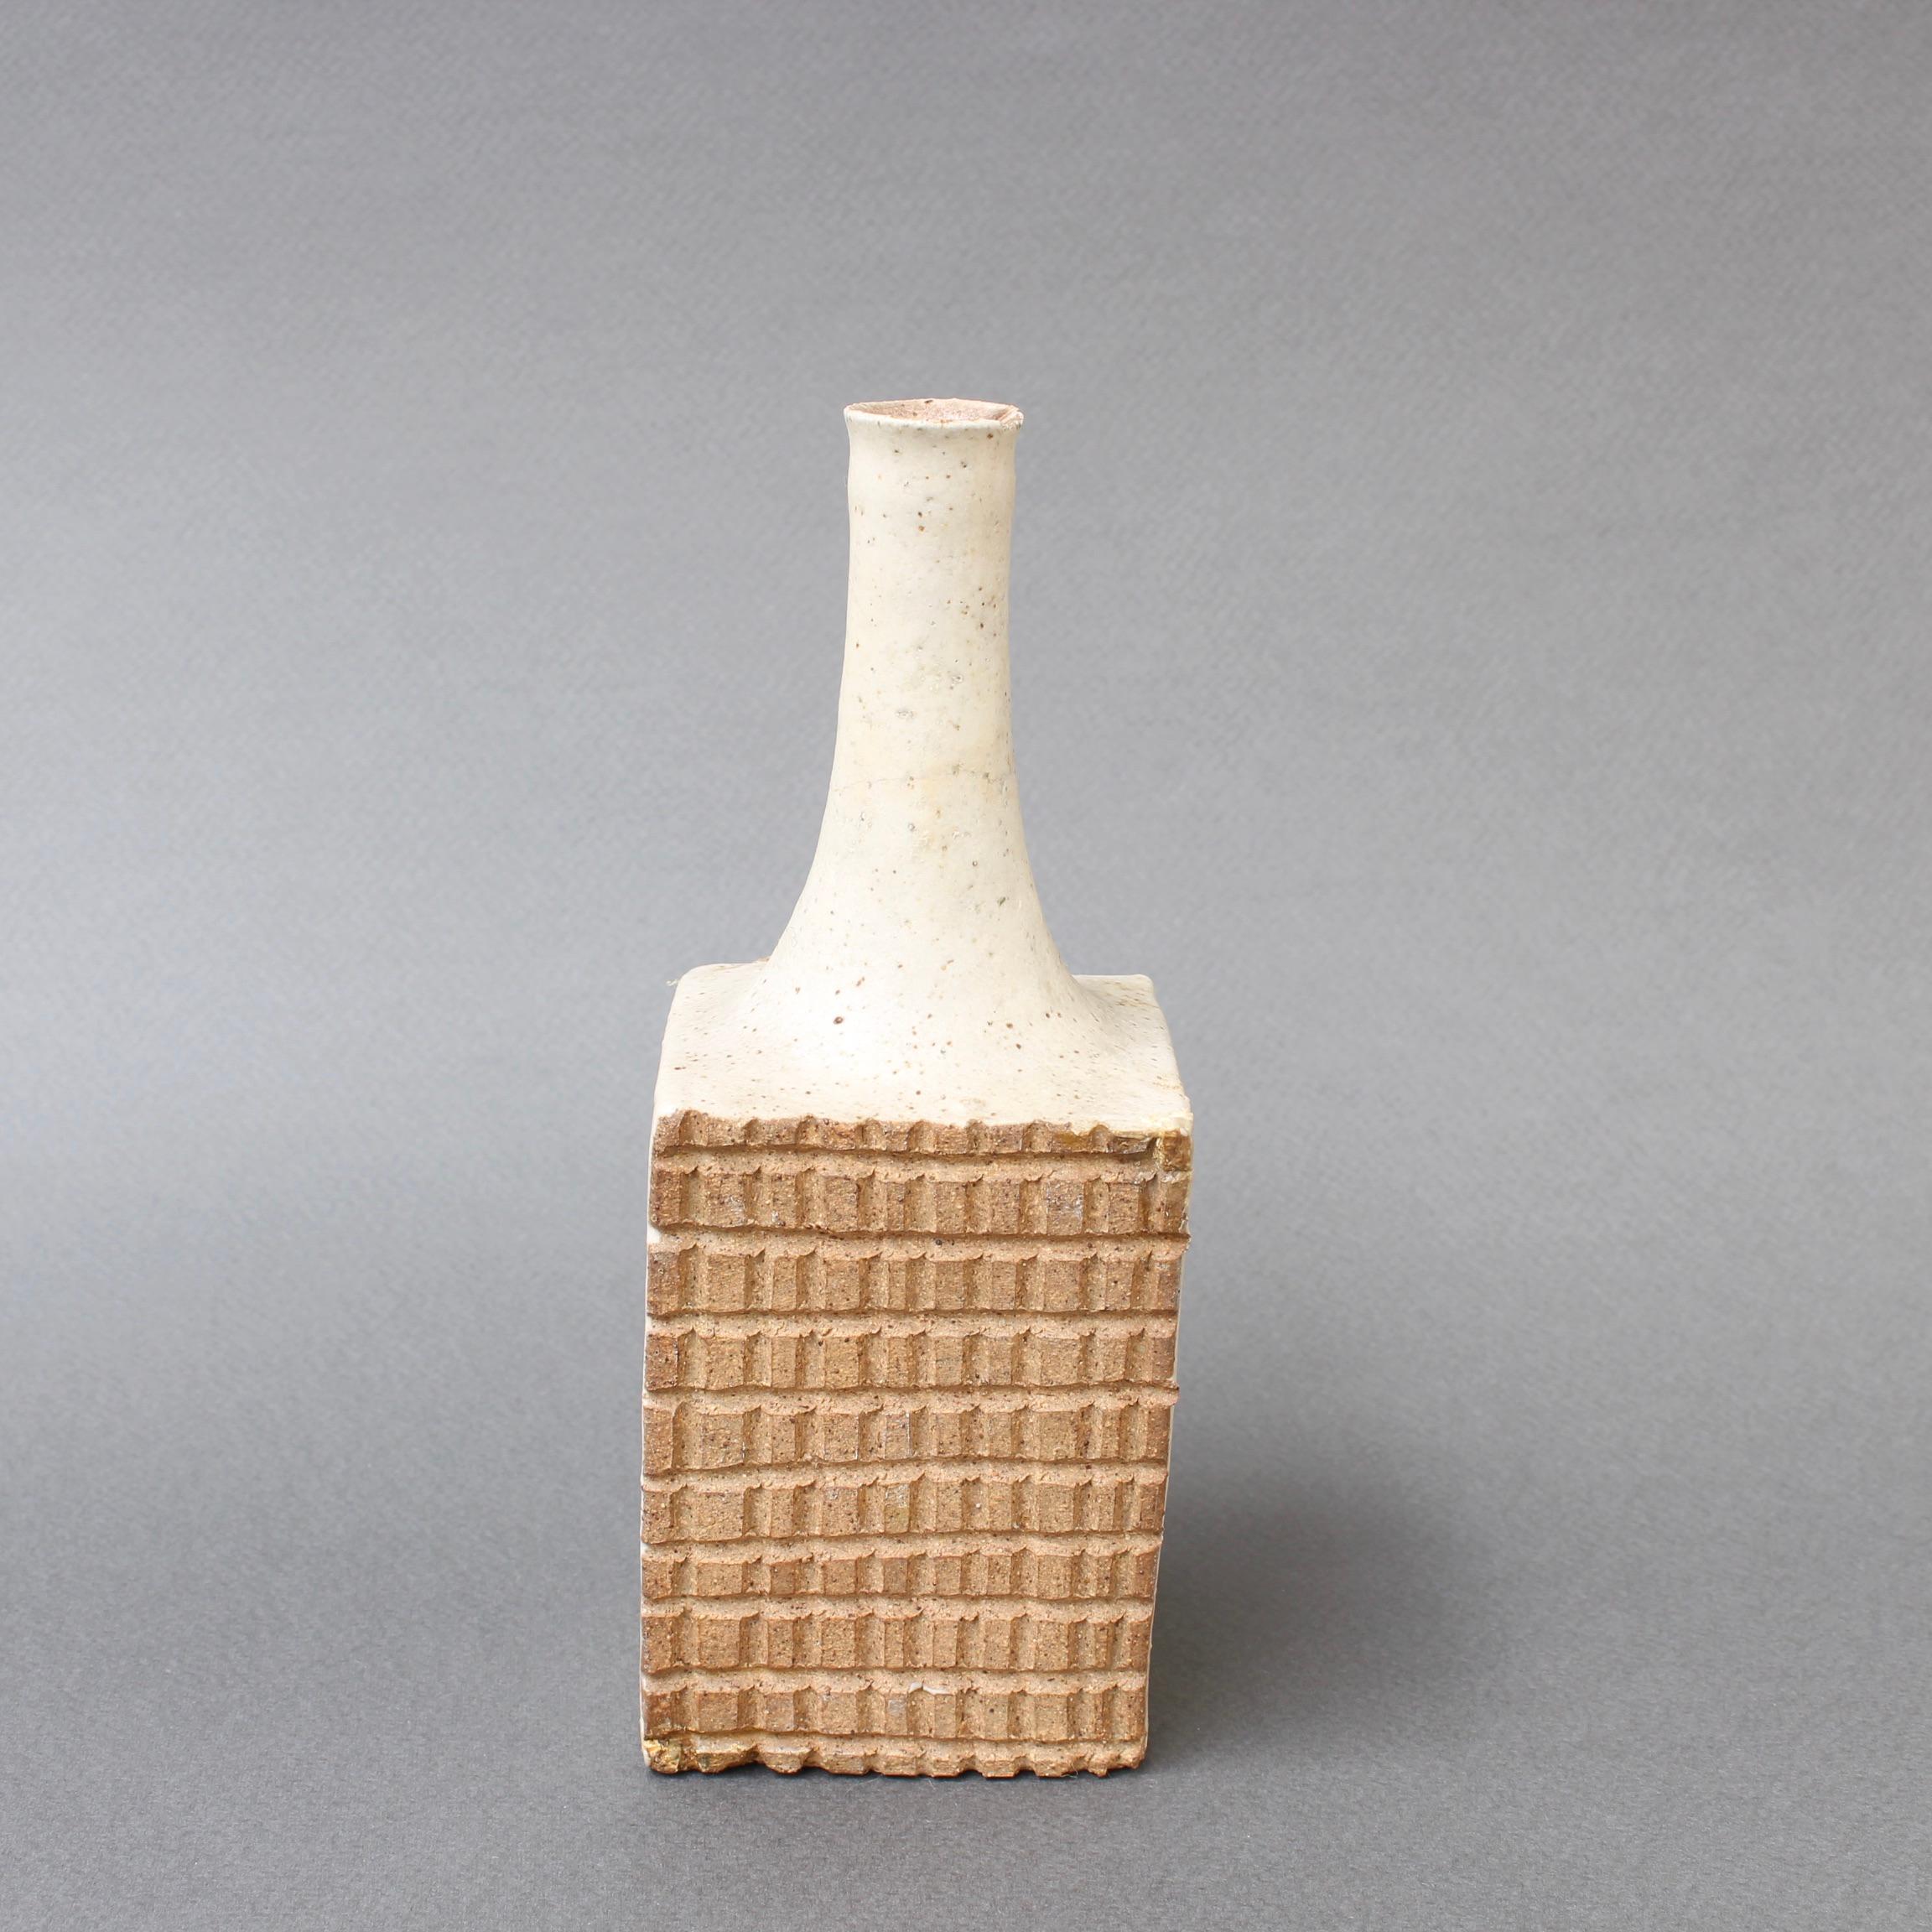 Italian ceramic decorative bottle by Bruno Gambone (circa 1980s). A graceful, diminutive piece with a rectangular base is capped by a long, elegant mouth. Two sides of the bottle are graced with lines of smaller, sandy-colored repeating rectangles